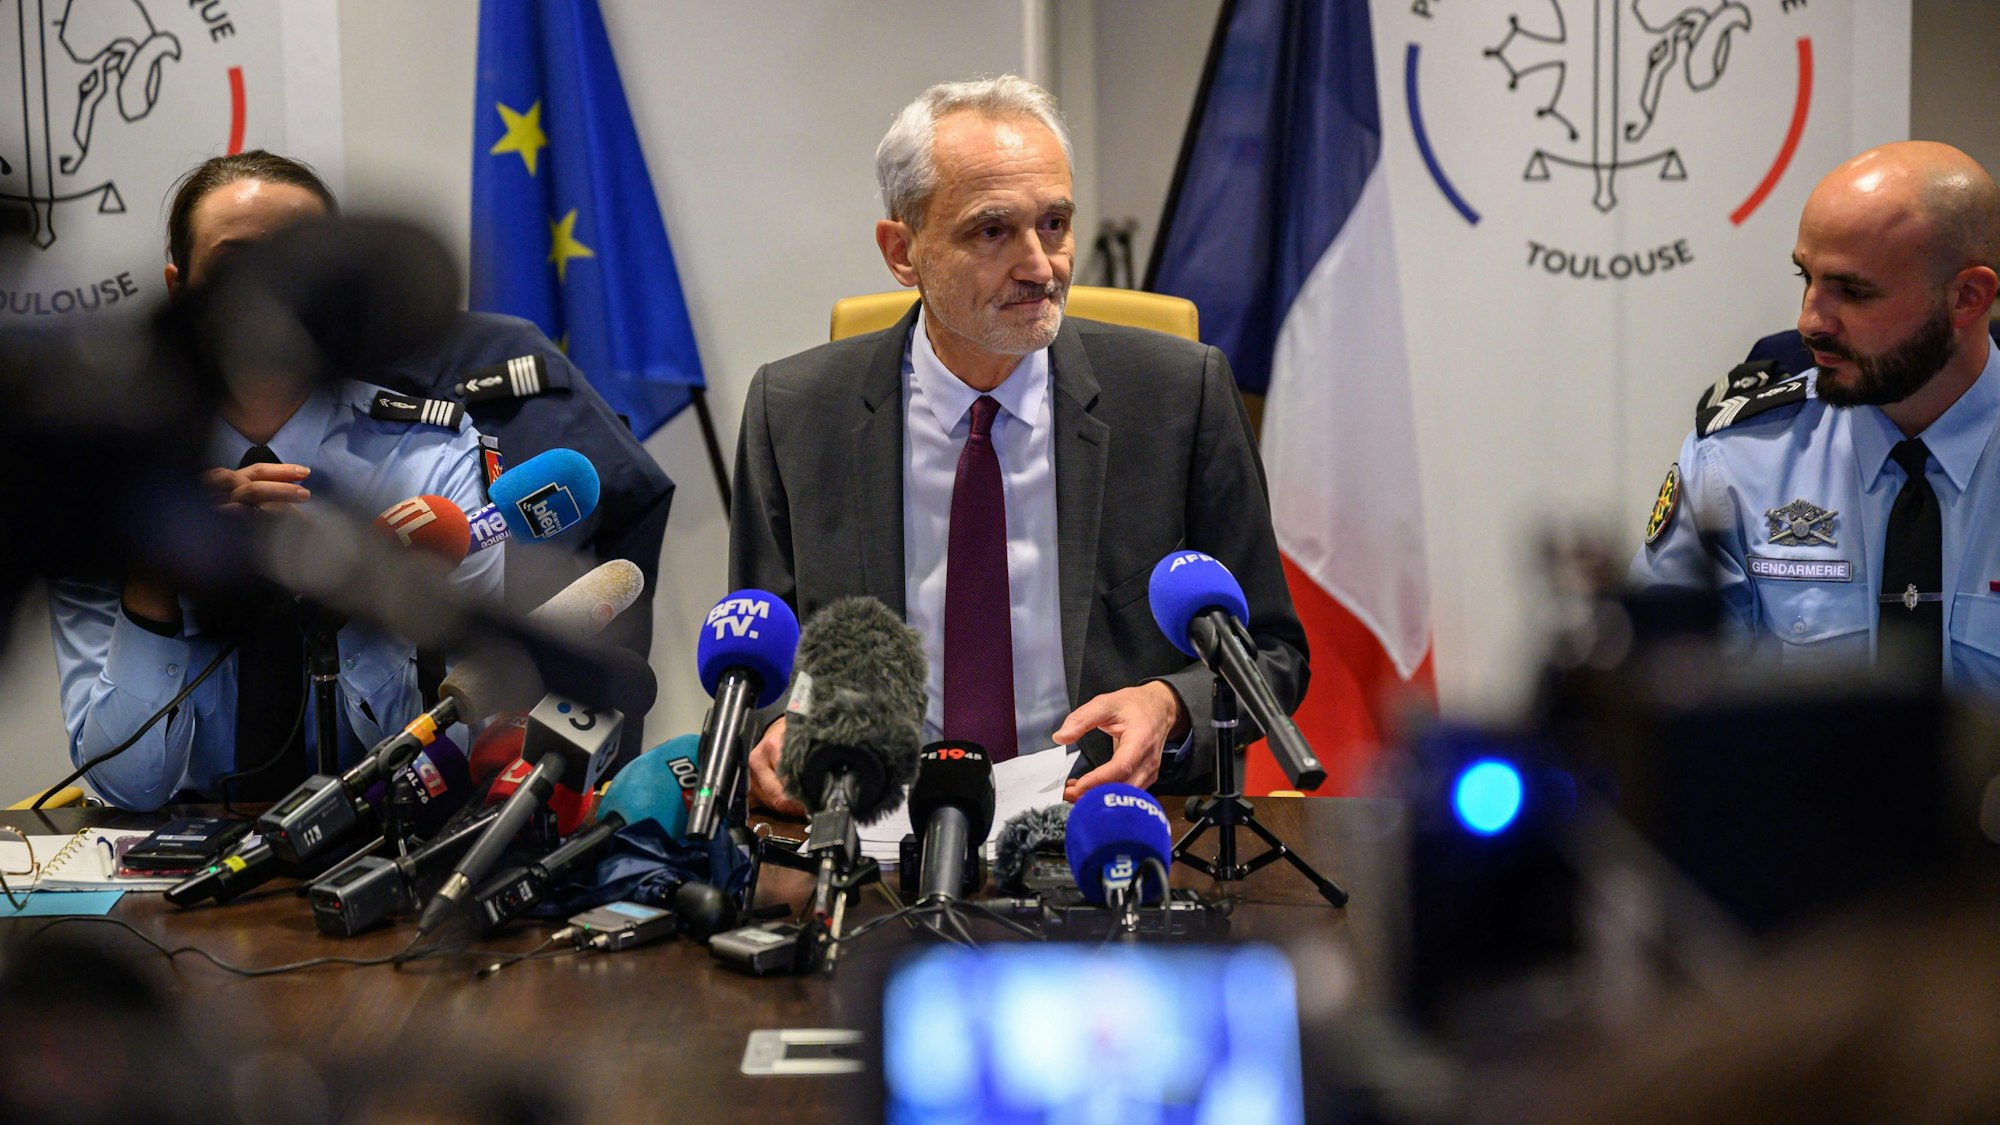 Public prosecutor Antoine Leroy holds a press conference about missing British teen Alex Batty, at the Palais de Justice in Toulouse, southwestern France, on December 15, 2023. A British 17-year-old found in France six years after going missing in Spain is to return home to England in the coming days, British and French authorities said on December 15. Alex Batty, originally from the northern English city of Oldham, was picked up by a driver in a mountainous area in southern France, with checks by French and British police confirming his identity. Police have said they suspect his mother Melanie Batty, who did not have parental guardianship, and grandfather David Batty of abducting him in 2017 when he was 11, under the pretence of going on holiday in Spain. (Photo by Ed JONES / AFP)